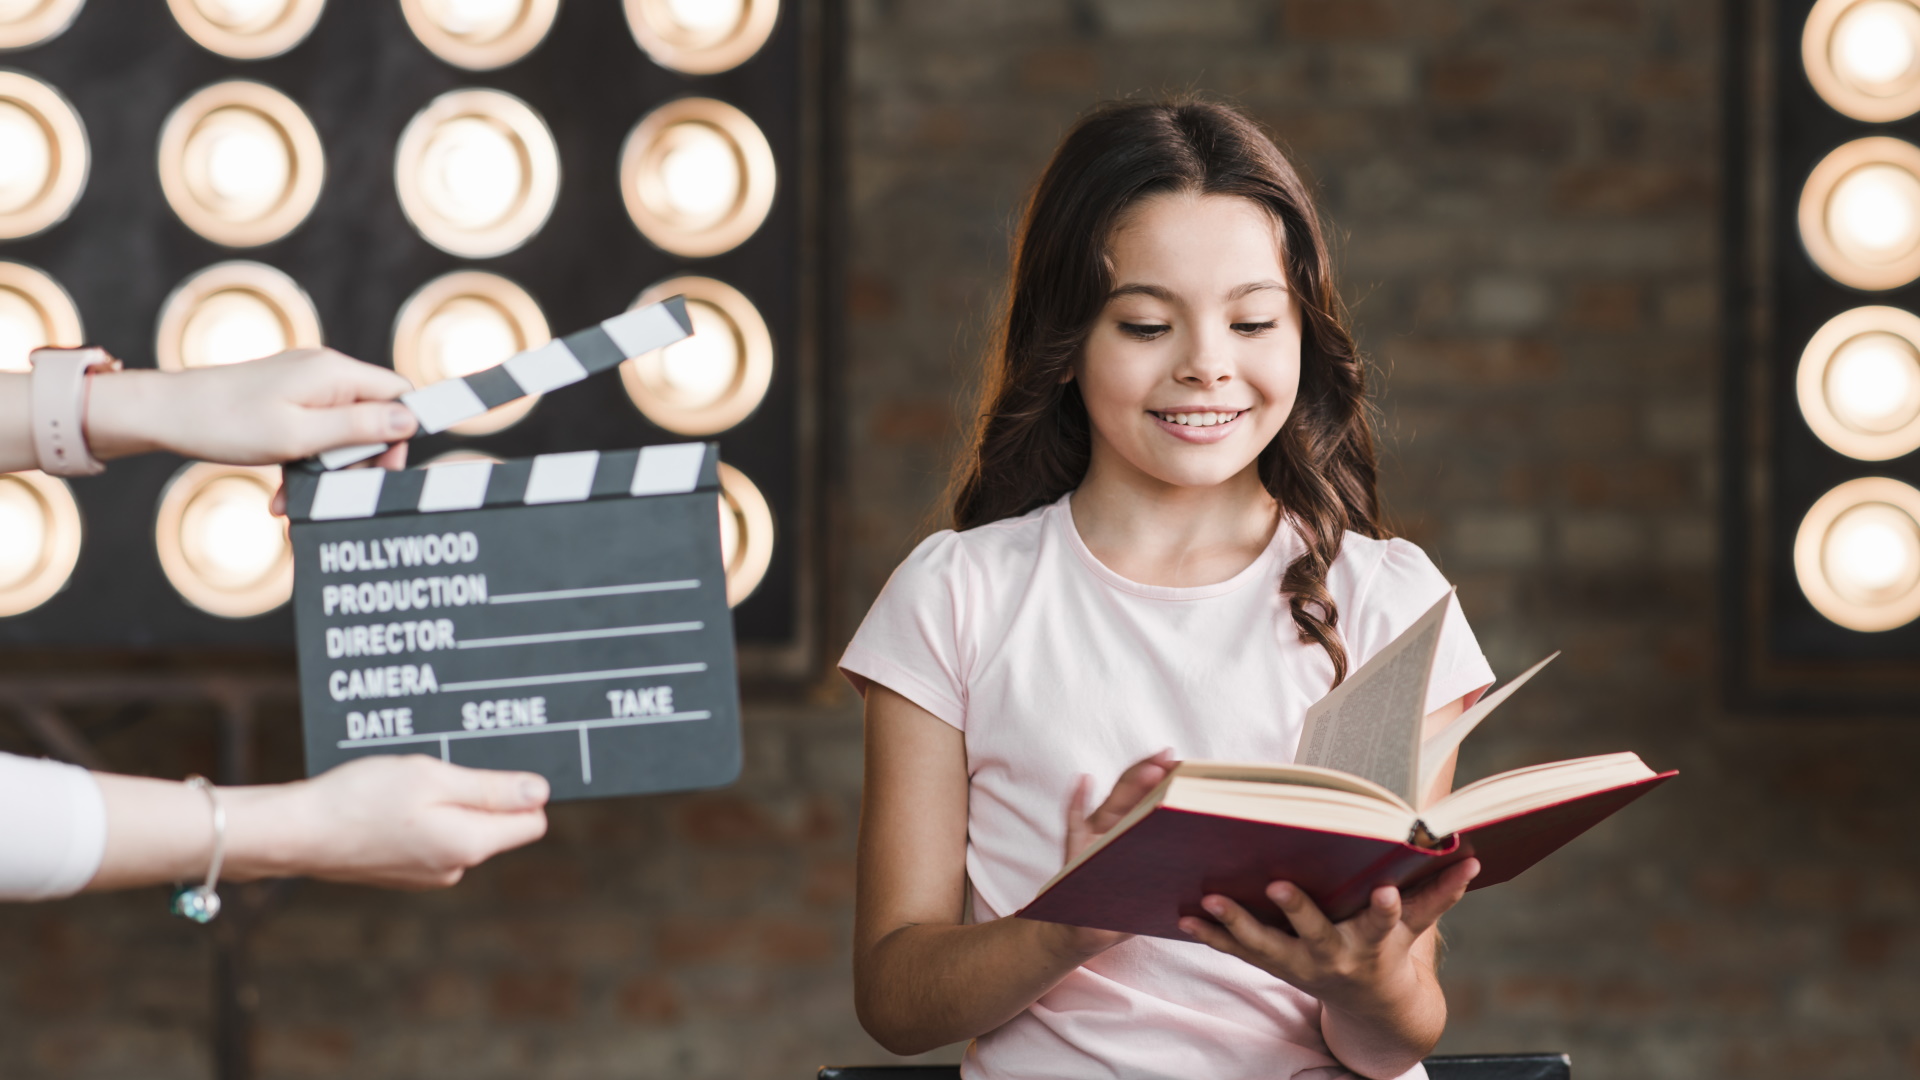 And… Action: Let’s teach English with Cinema